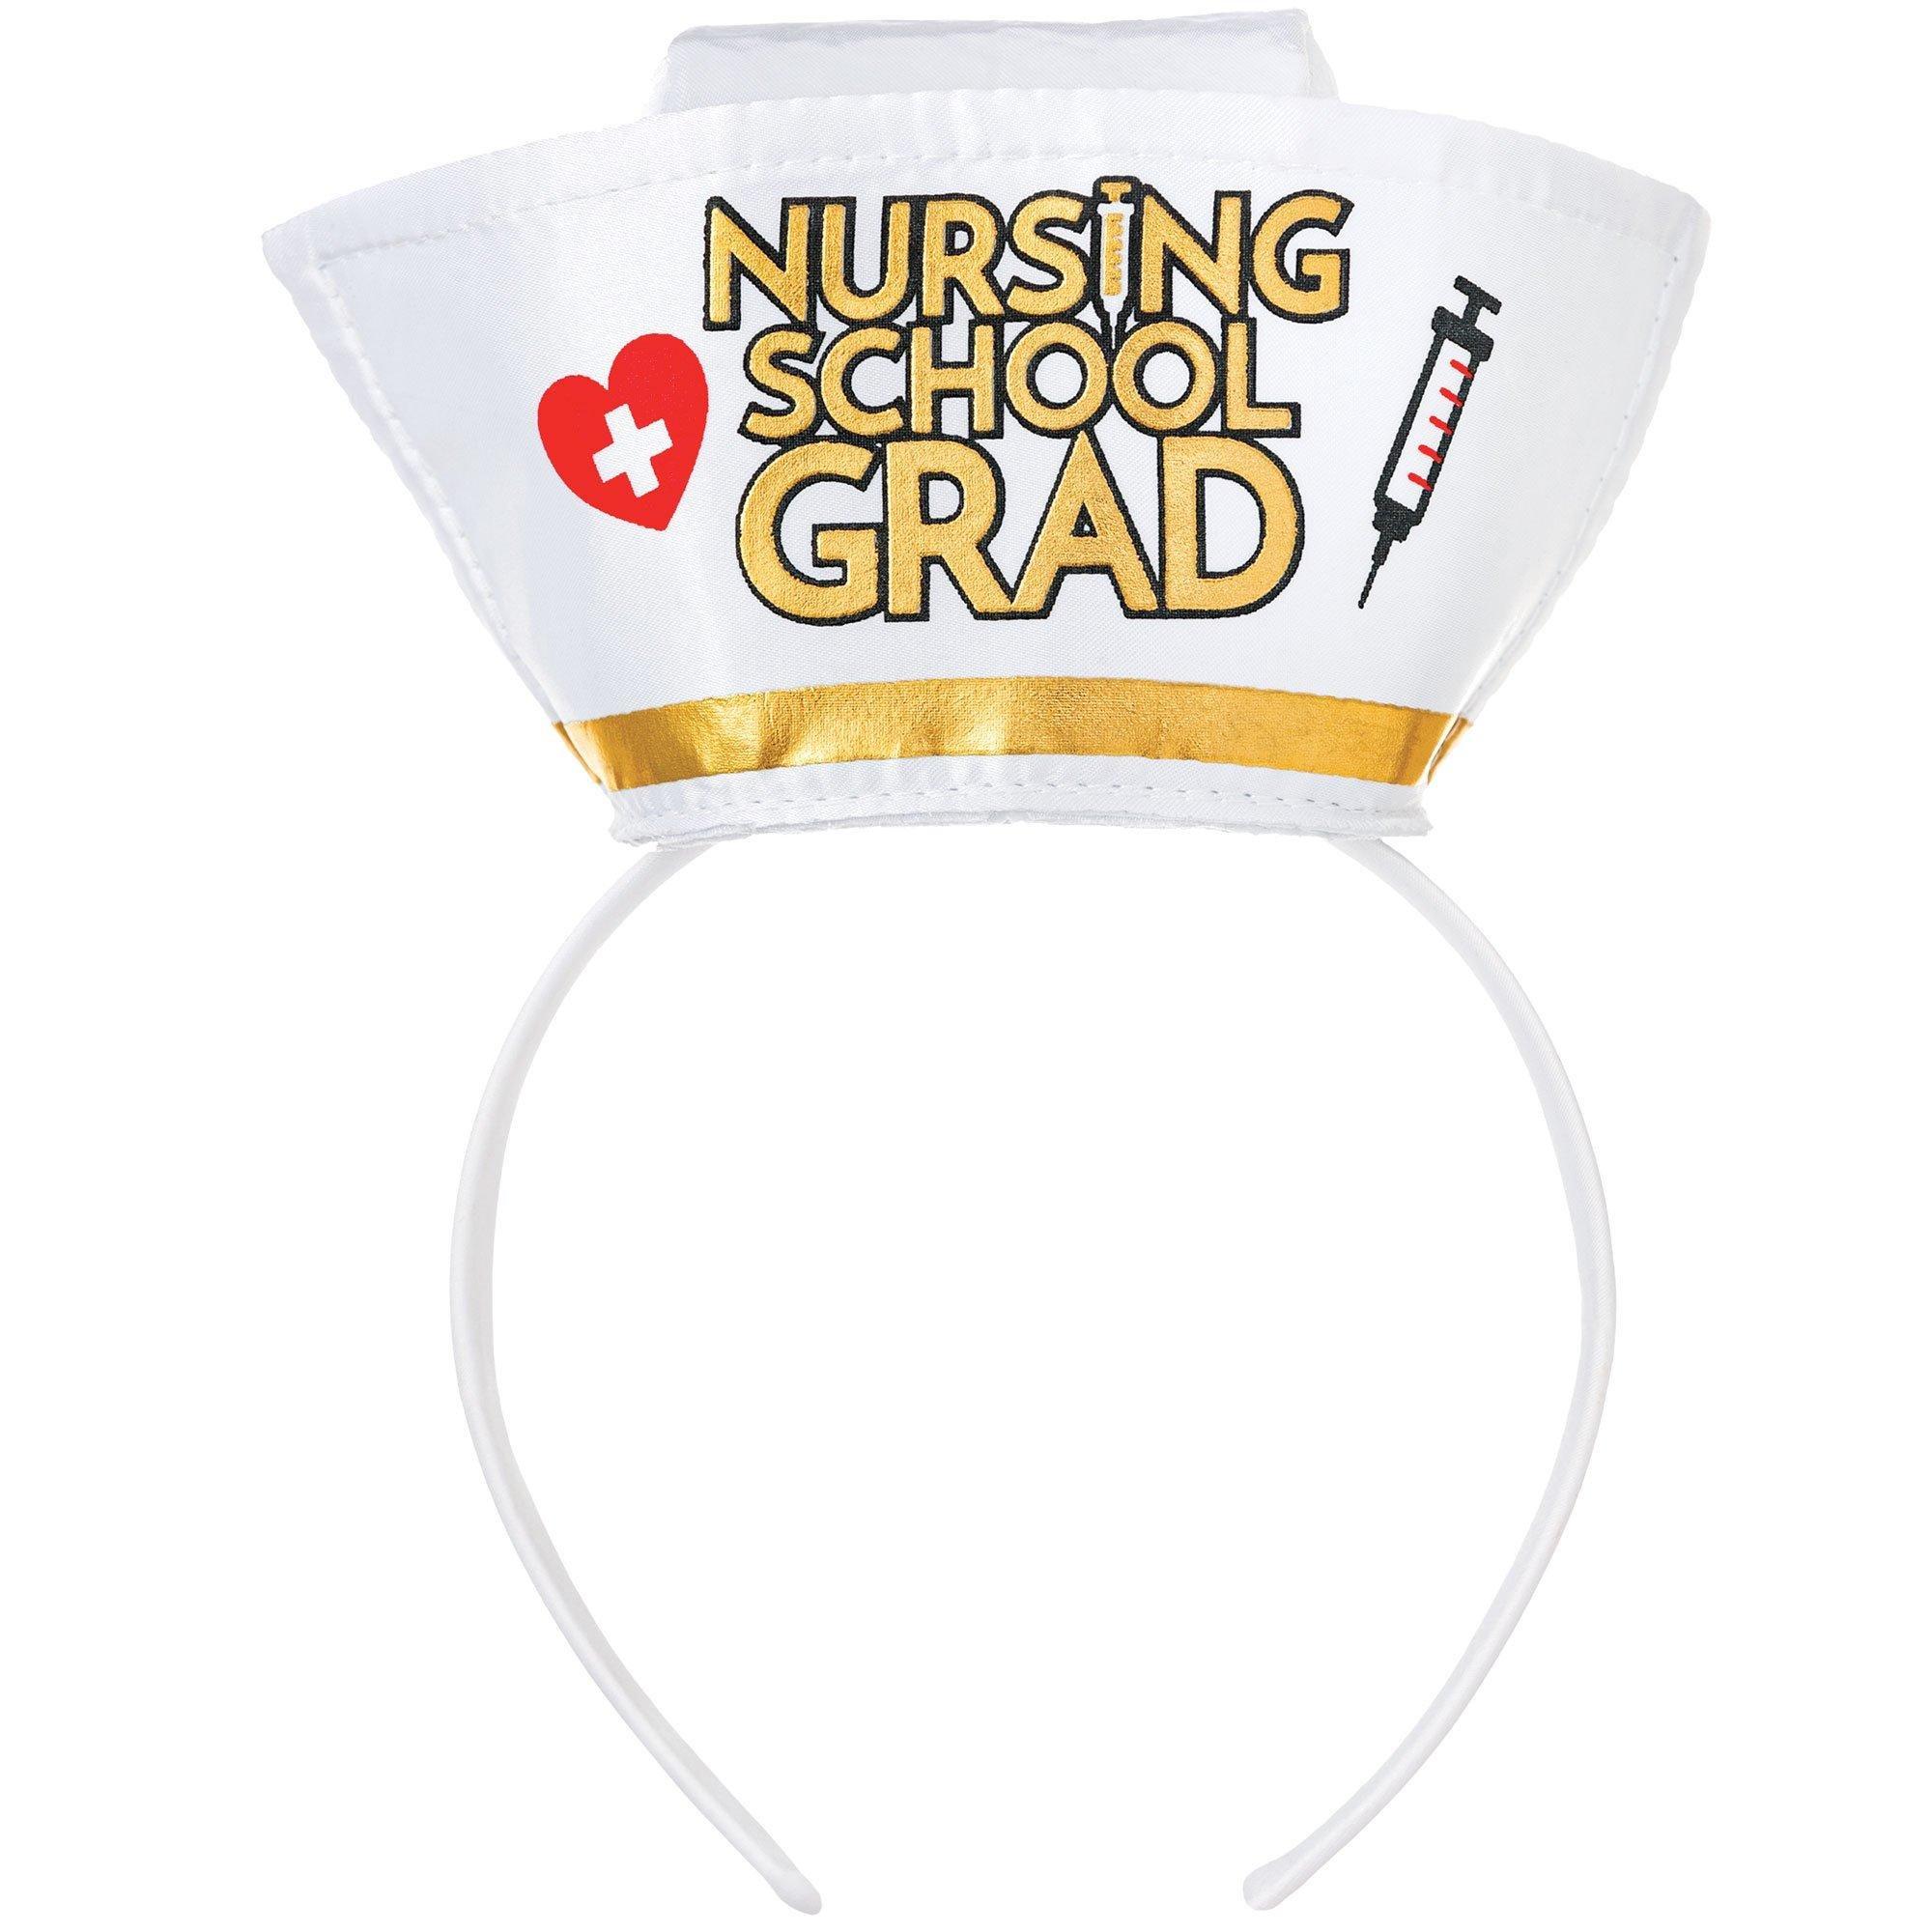 Graduation Party Supplies Kit for 30 with Decorations, Banners, Plates, Napkins, Cups - Nurses Call the Shots